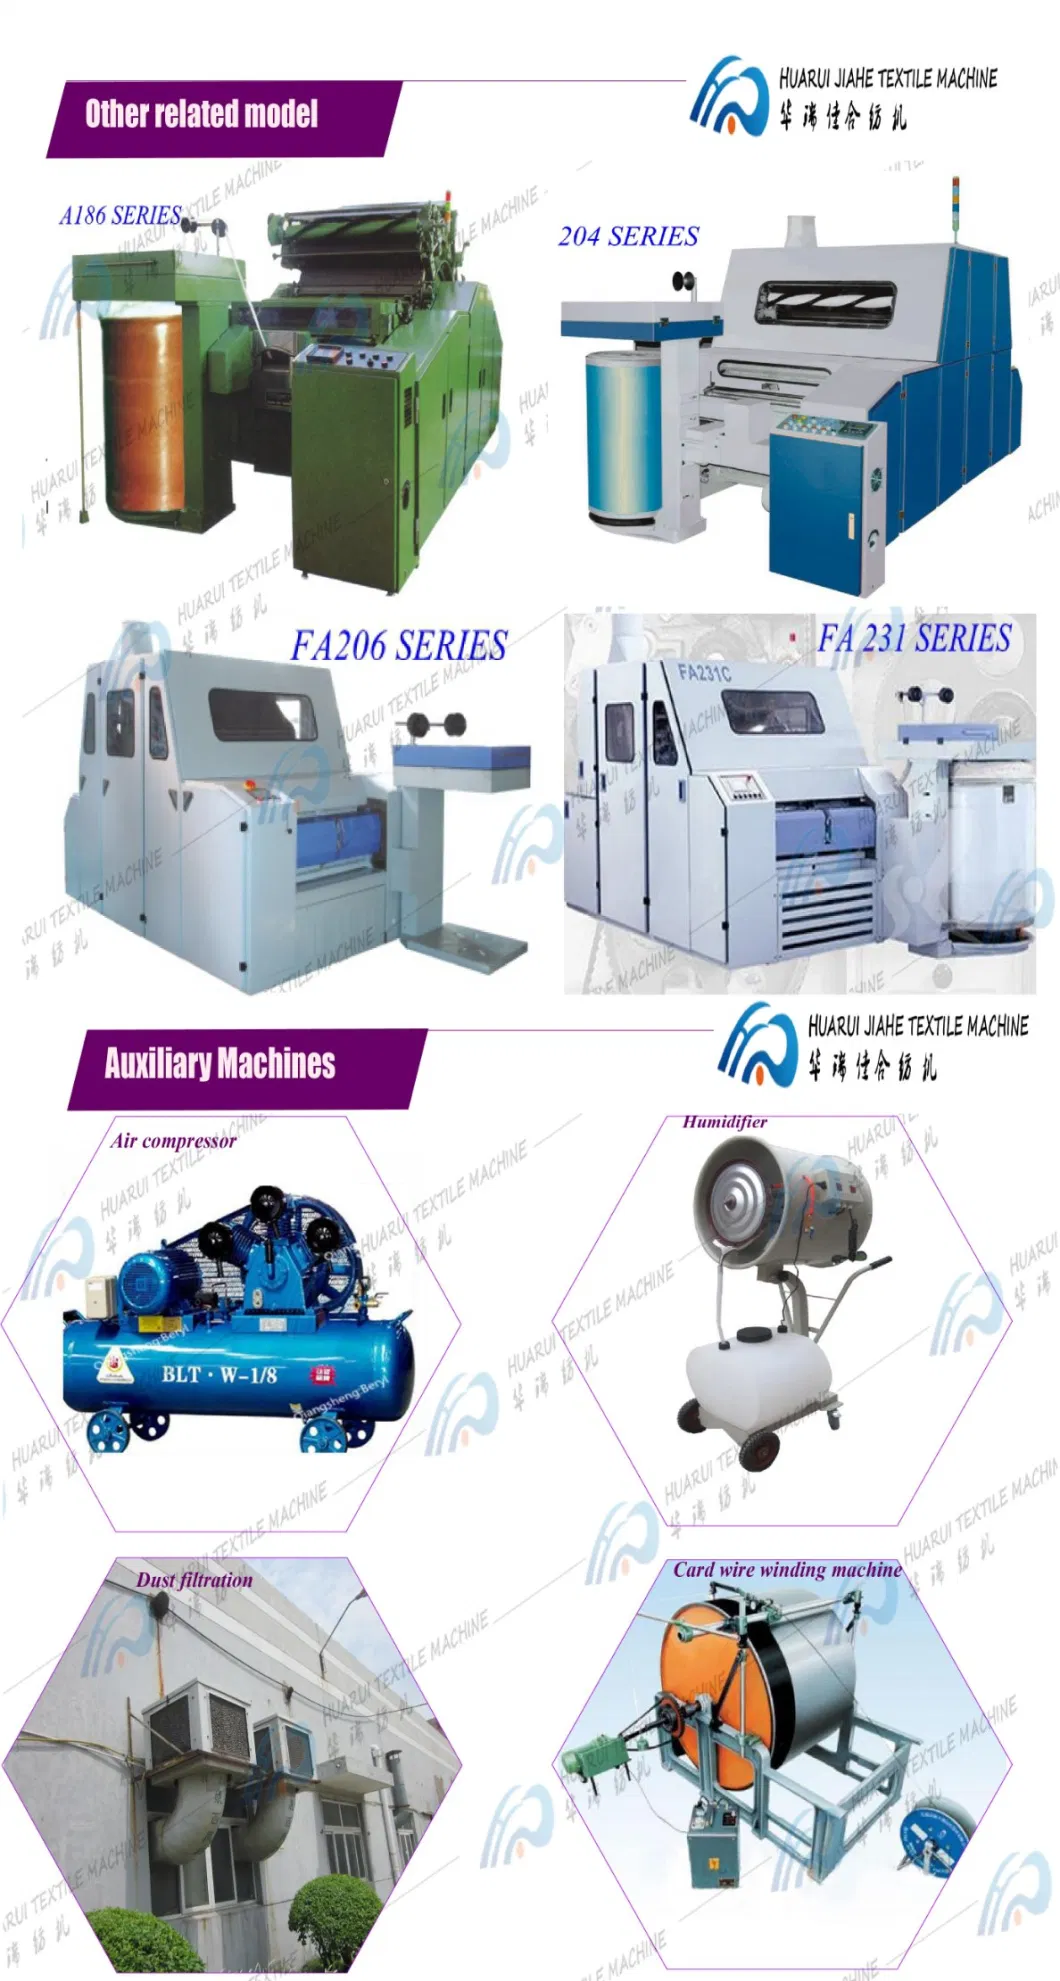 Service First Laboratory Infrared Sample Proofing and Dyeing Machine Printing, Dyeing and Finishing Textile Machinery and Equipment